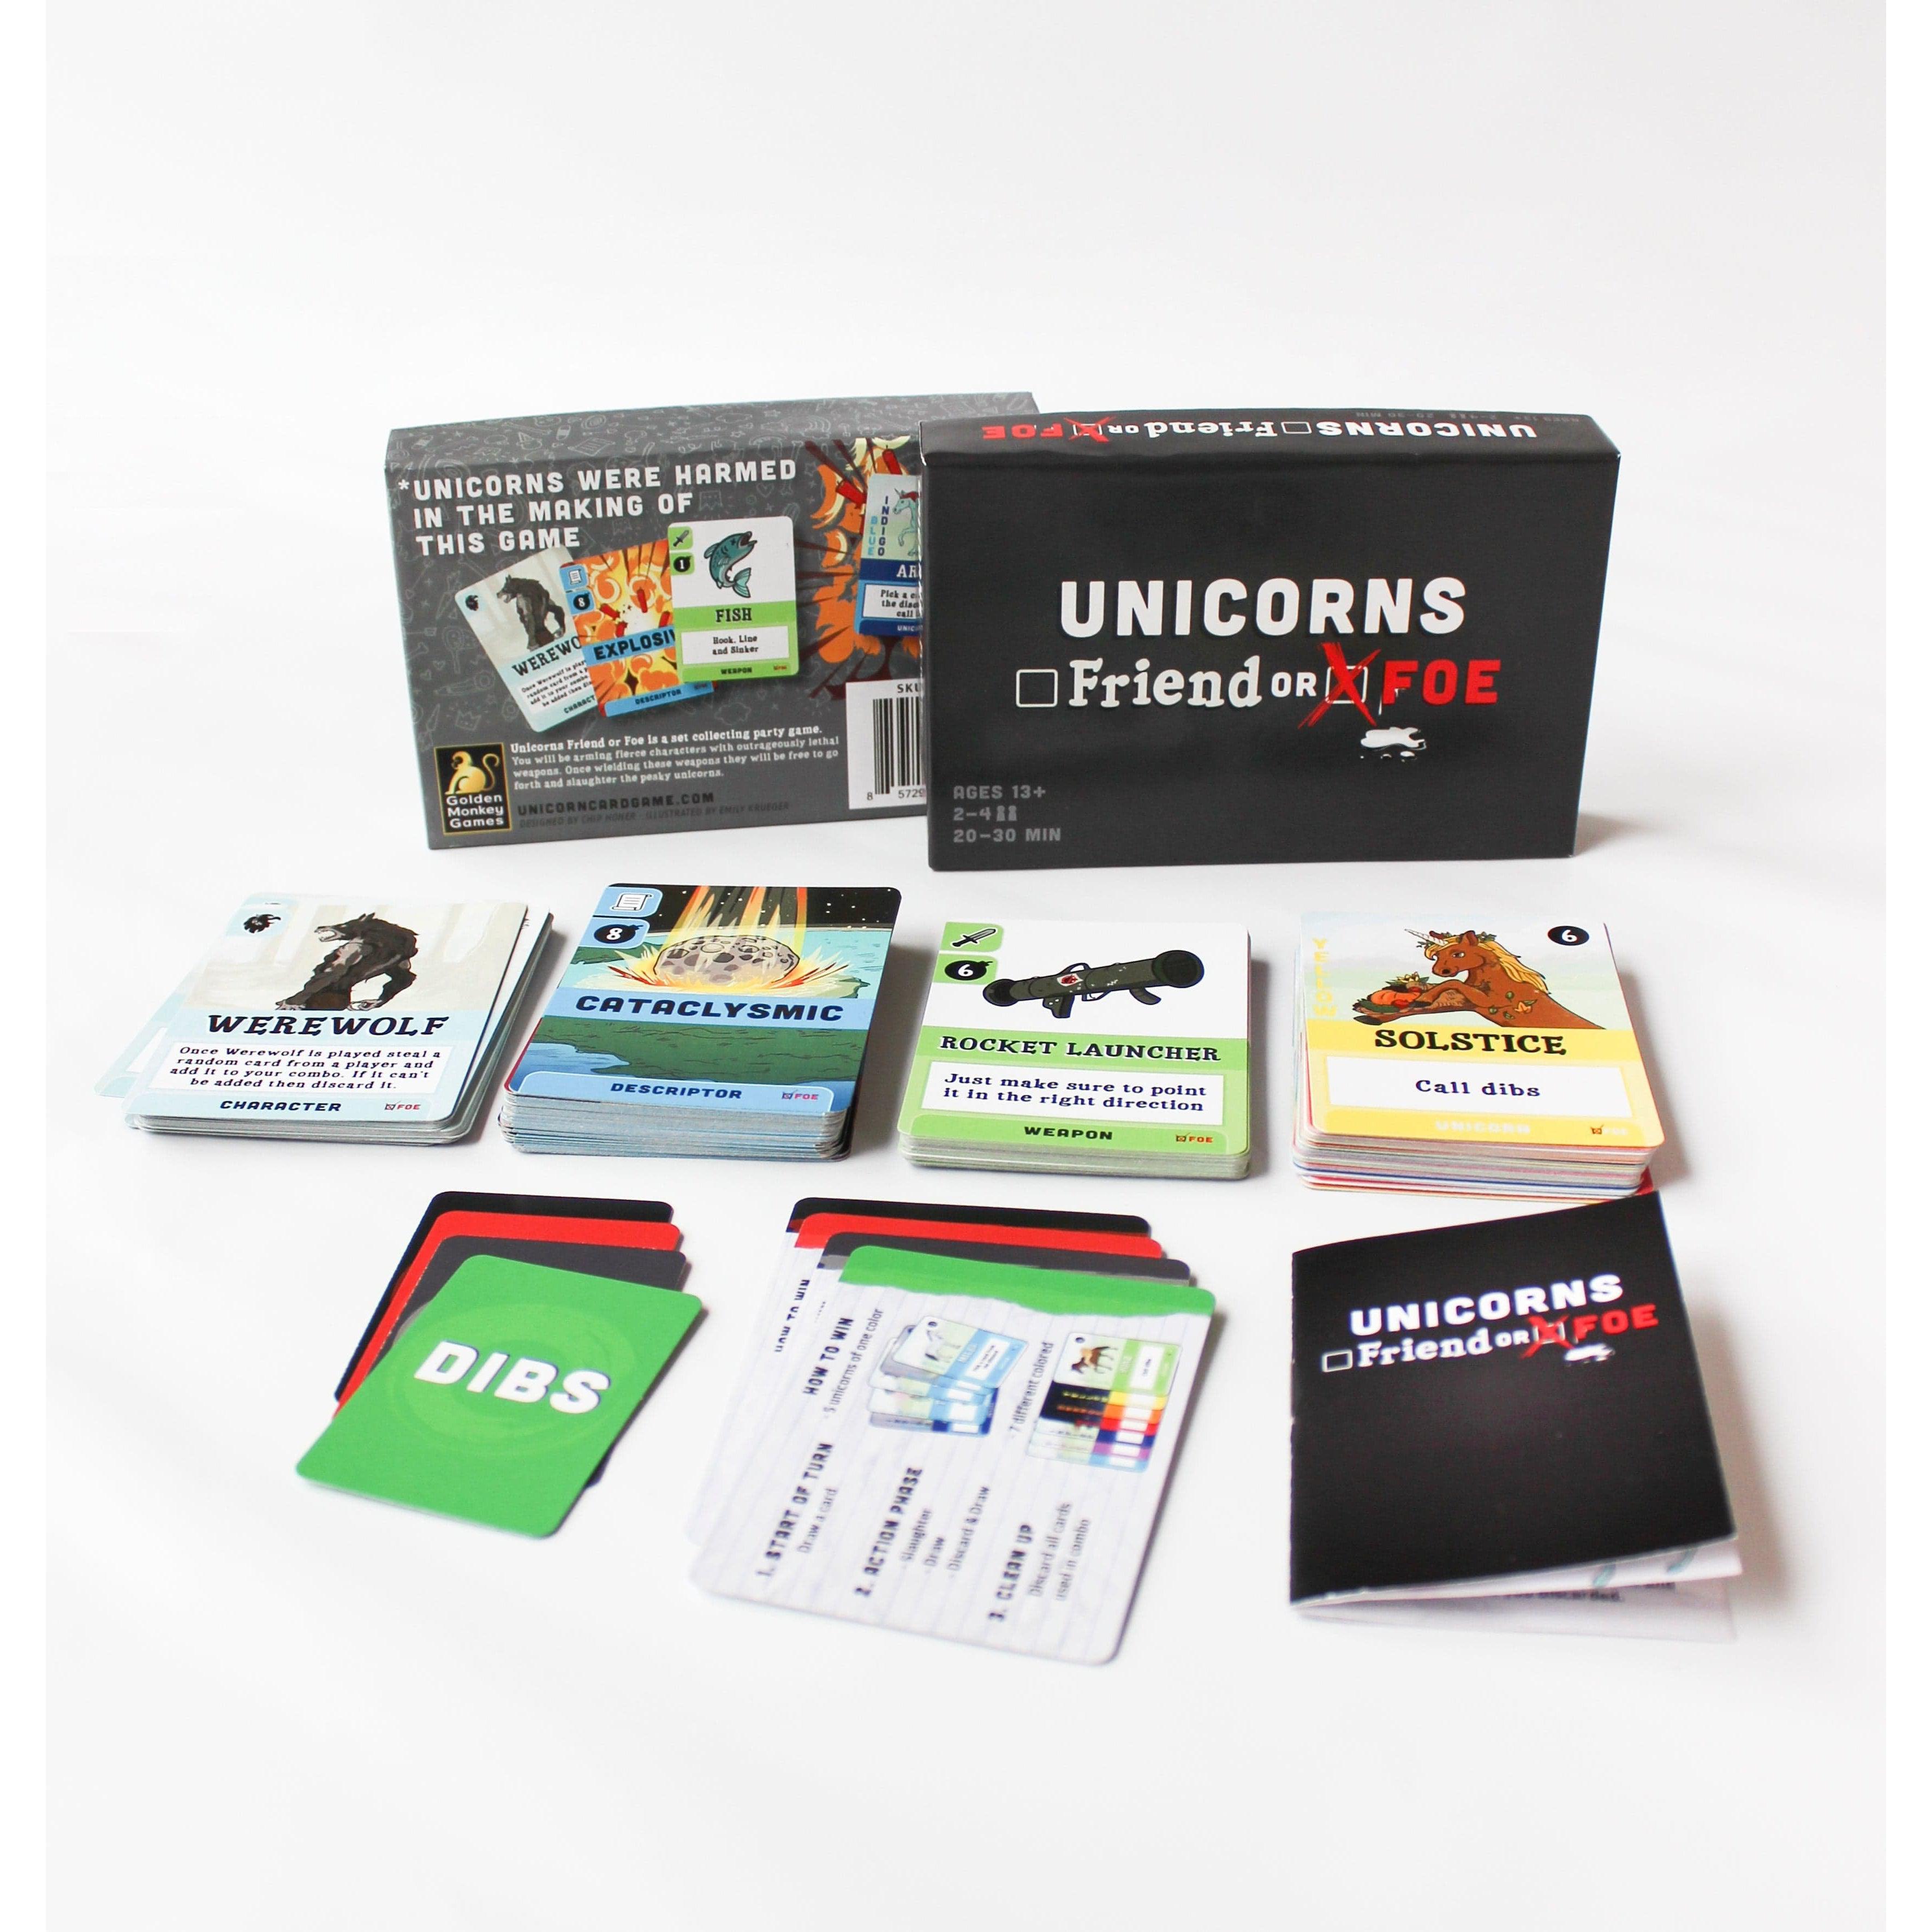 Golden Monkey Games-Unicorns Friends or Foe Party Card Game for Kids & Adults-GDN3002-Foe Edition-Legacy Toys